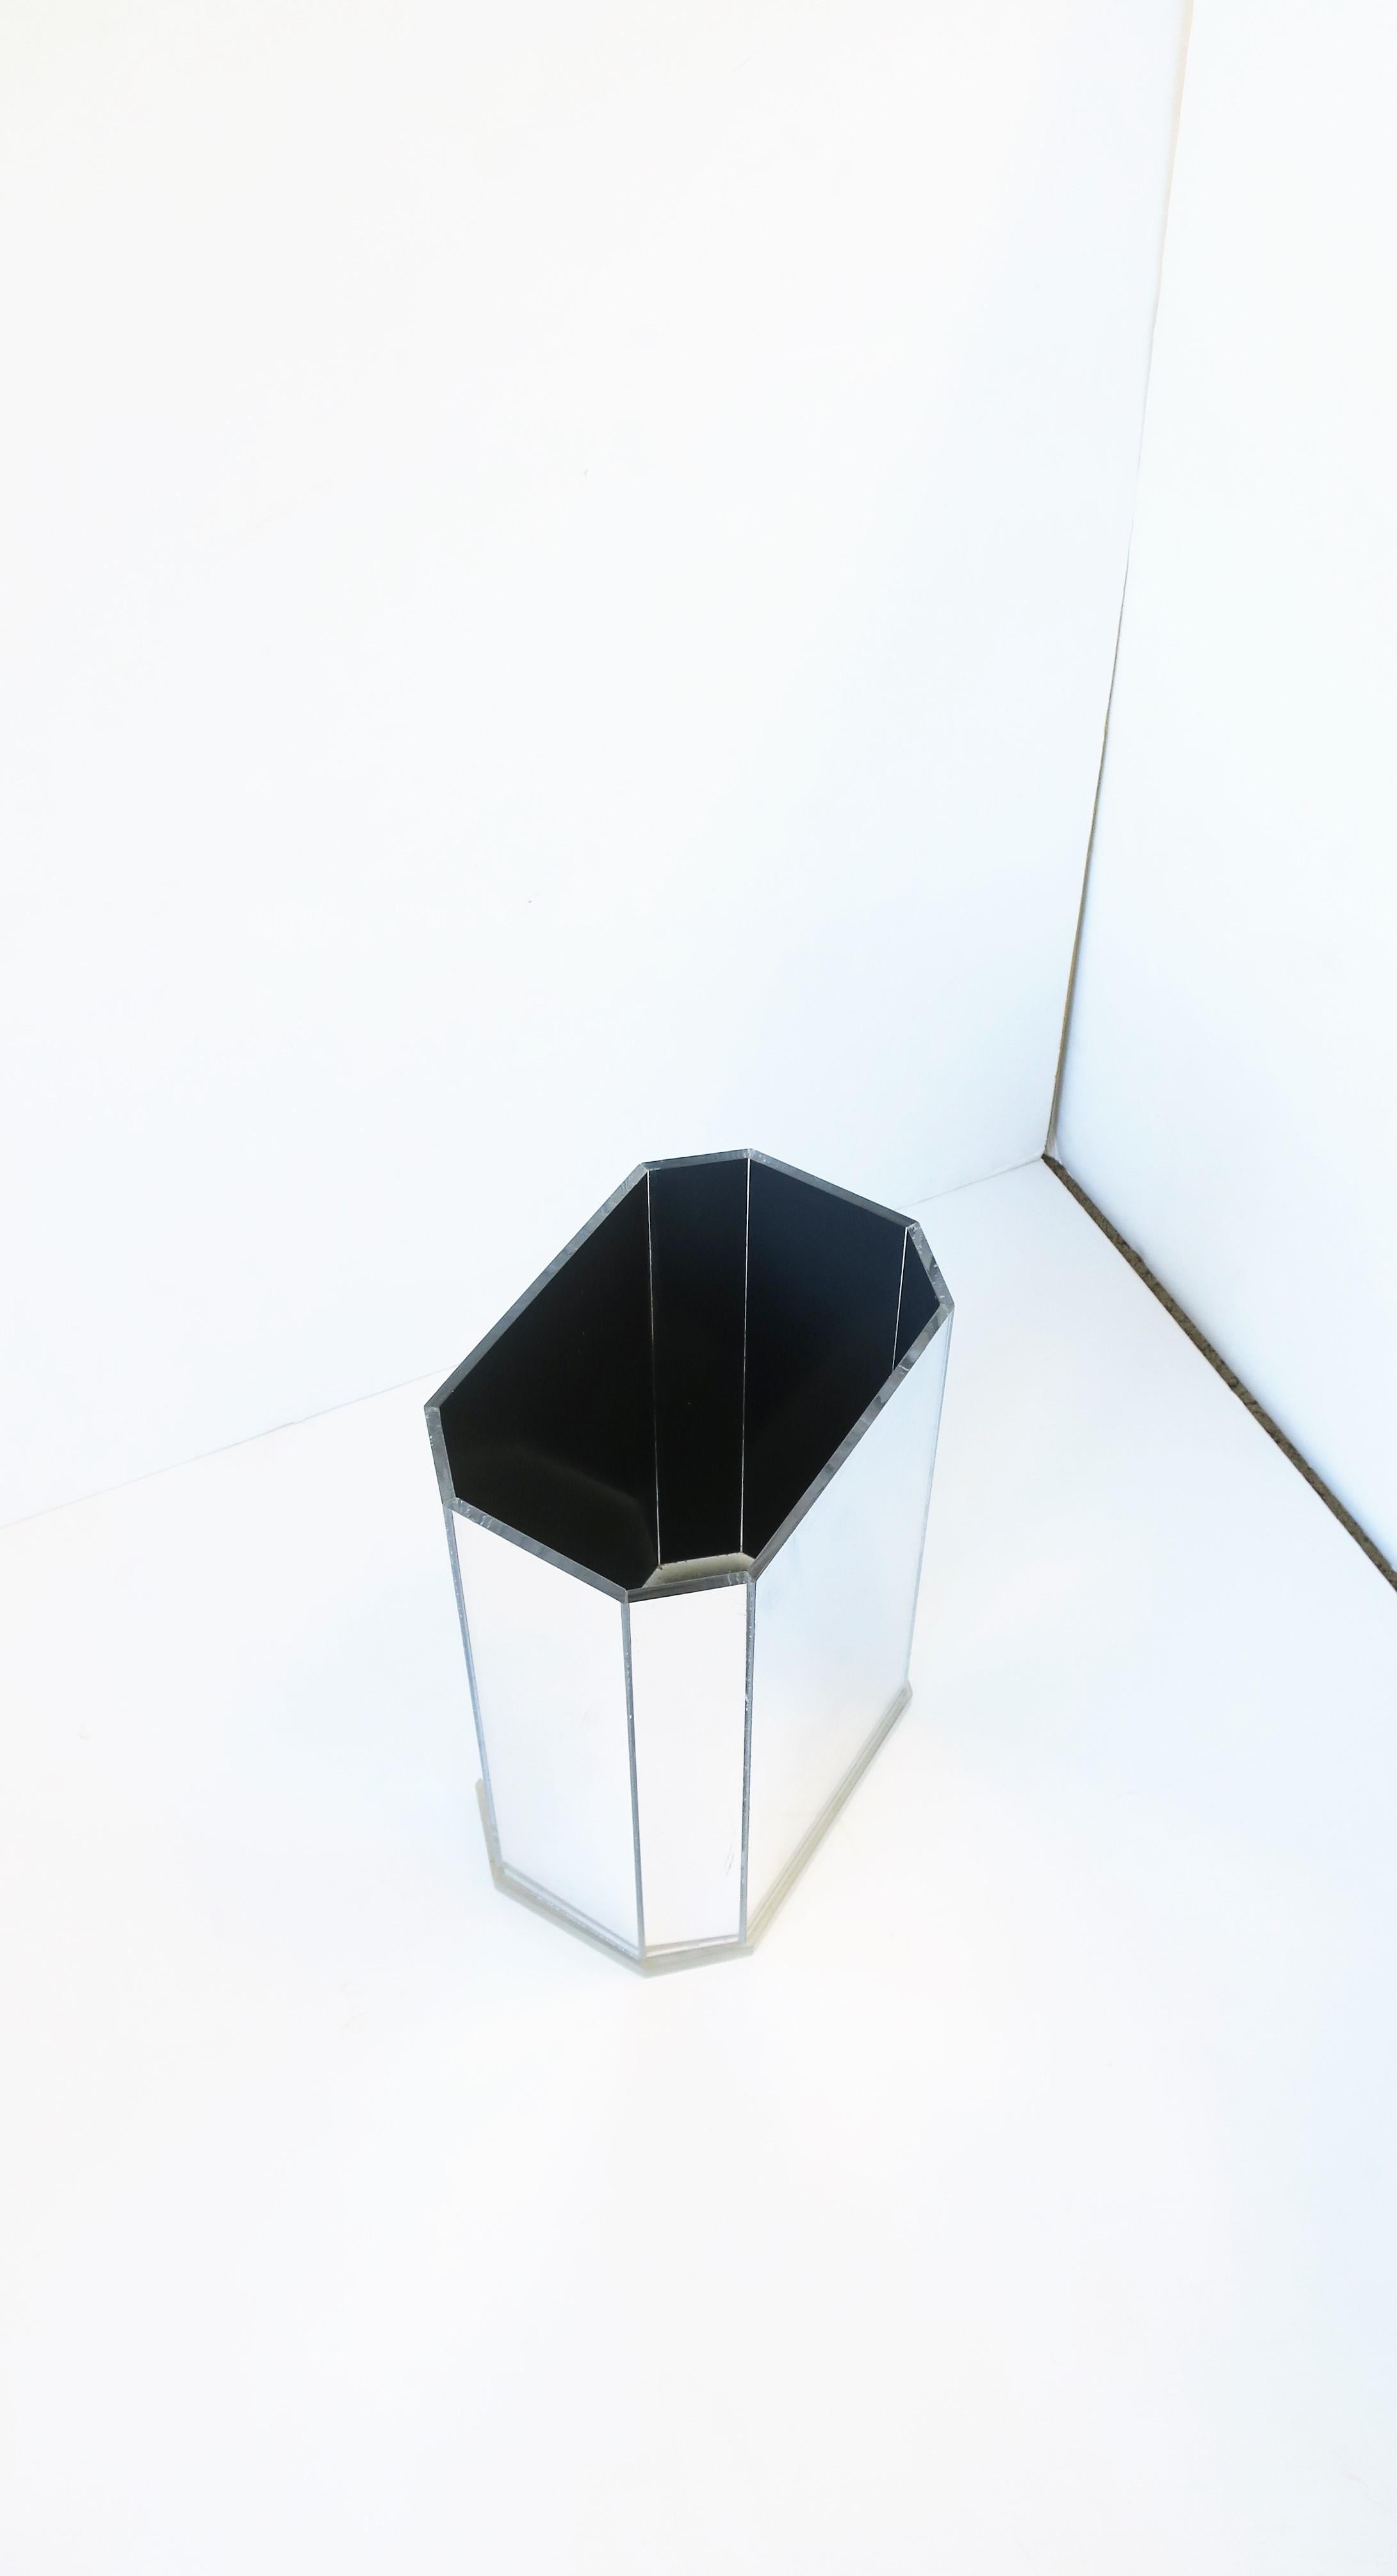 Late 20th Century Modern Mirrored Acrylic Wastebasket or Trash Can, ca. 1970s